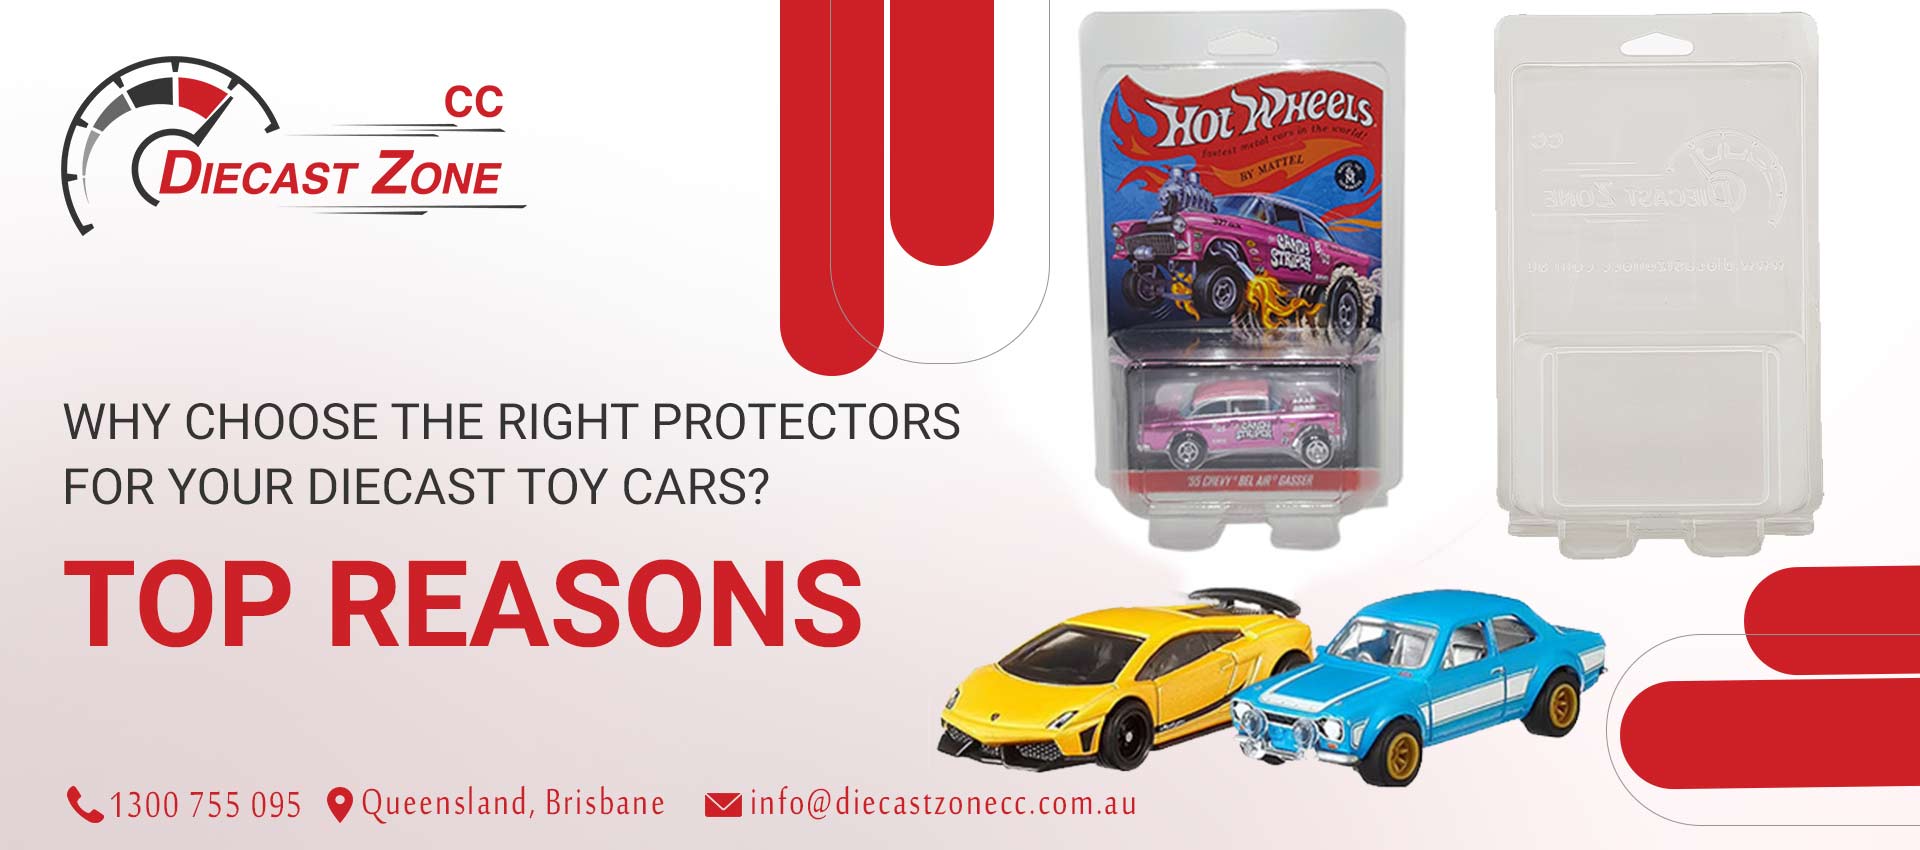 Why Choose the Right Protectors for your Diecast Toy Cars? Top Reasons